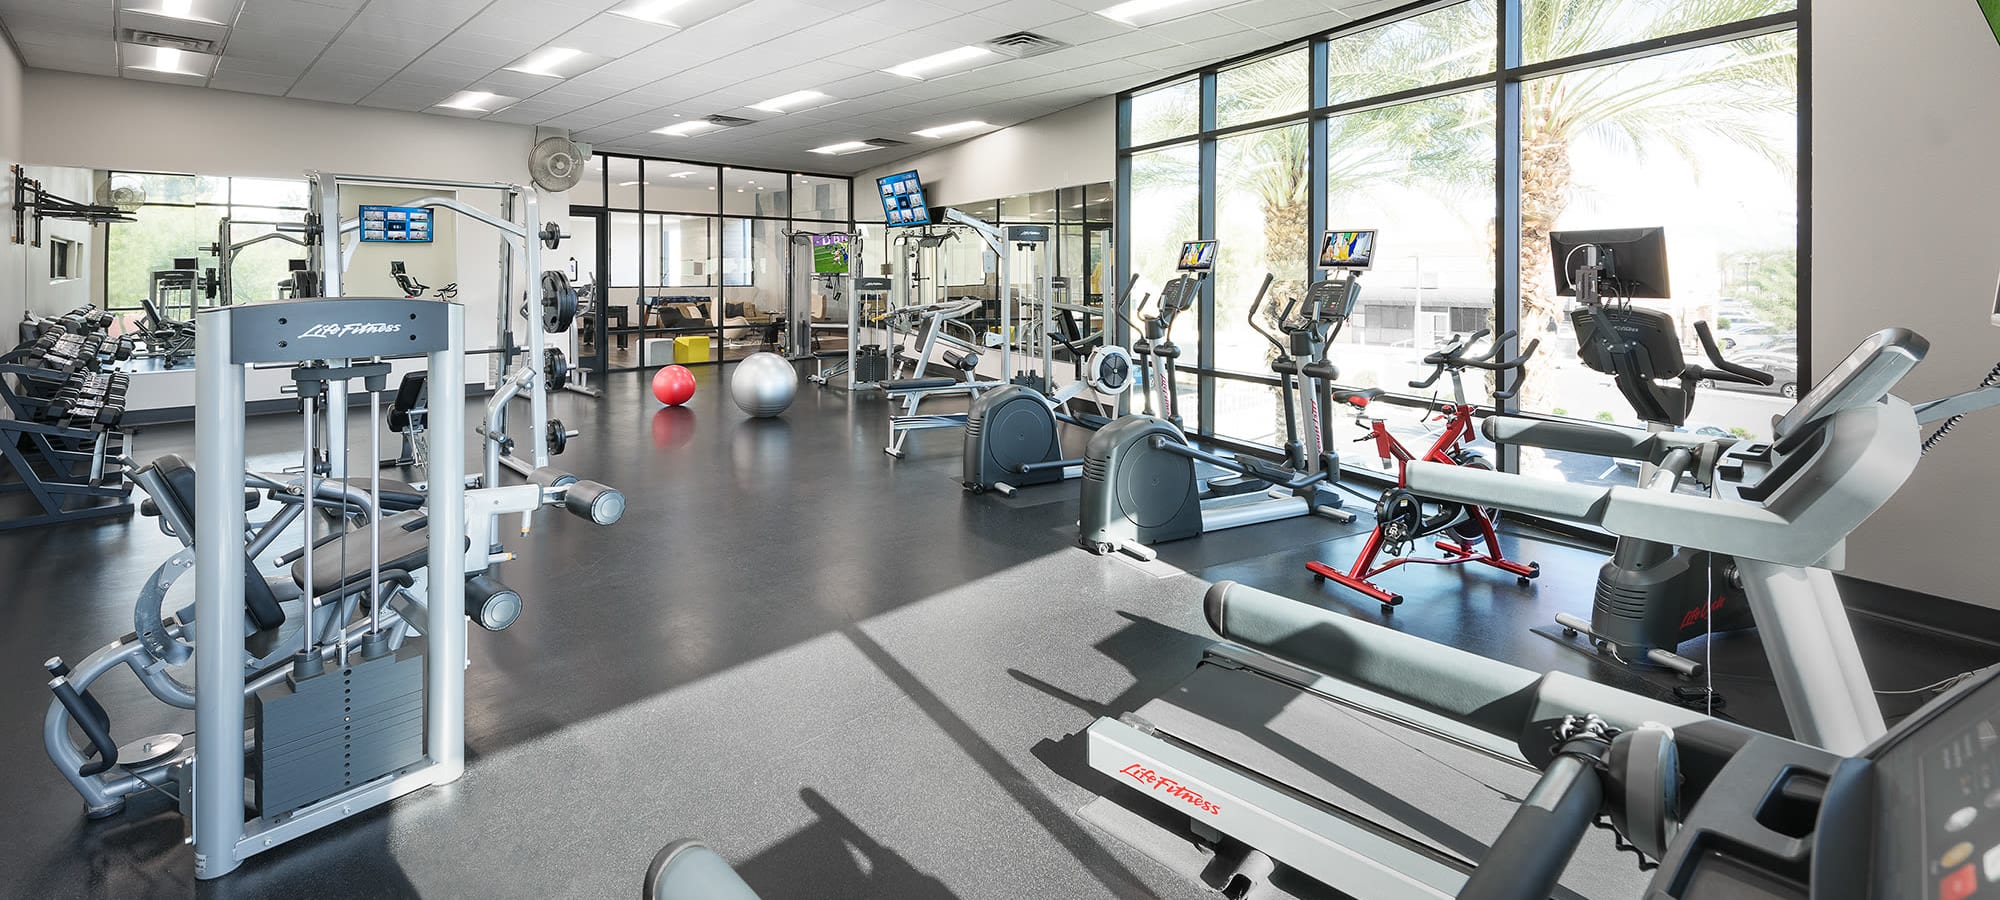 Well-equipped fitness center at Cactus Forty-2 in Phoenix, Arizona